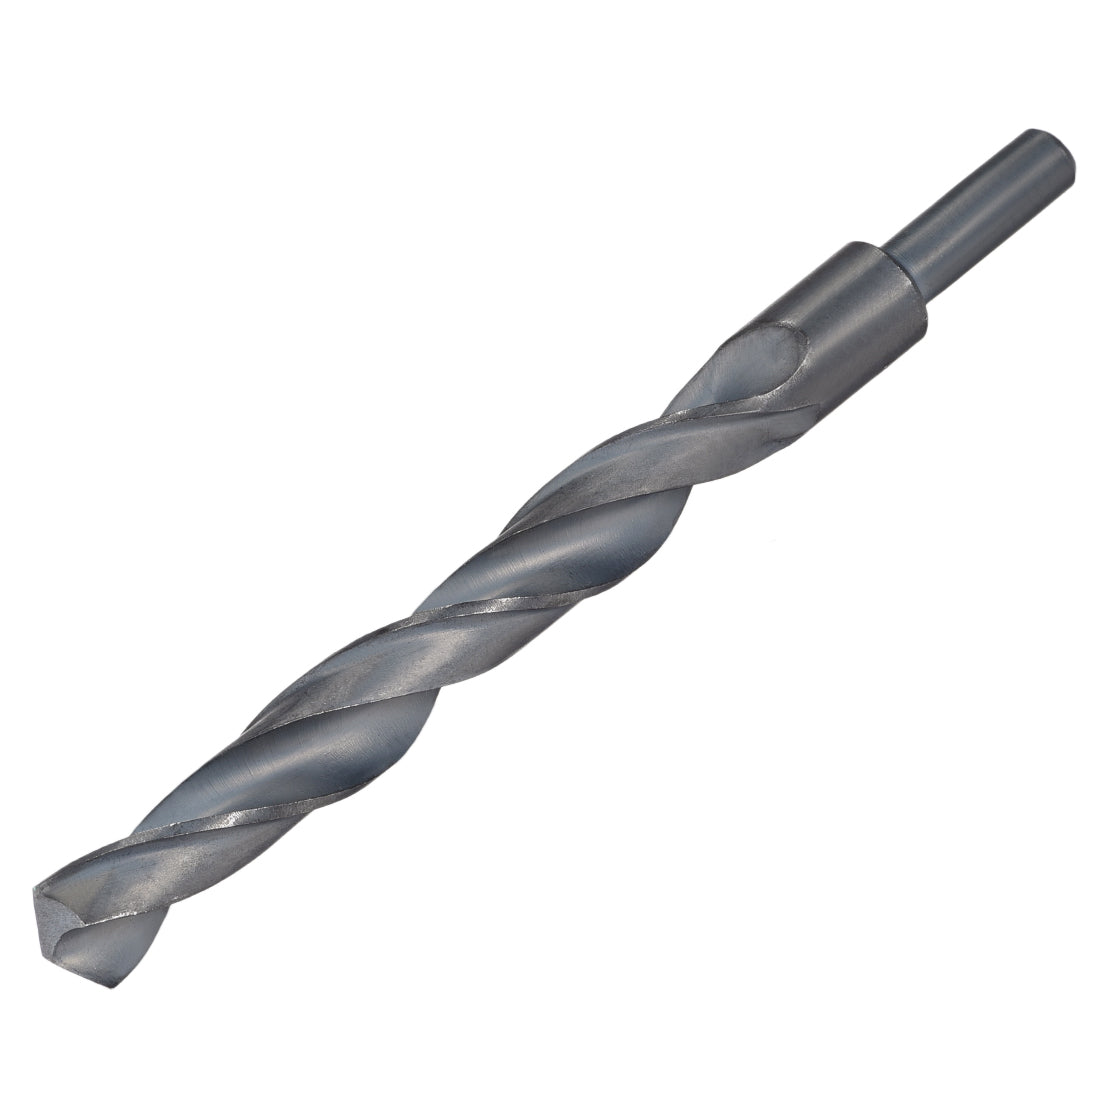 uxcell Uxcell Reduced Shank Twist Drill Bits 16mm HSS 4241 with 10mm Shank 1 Pcs